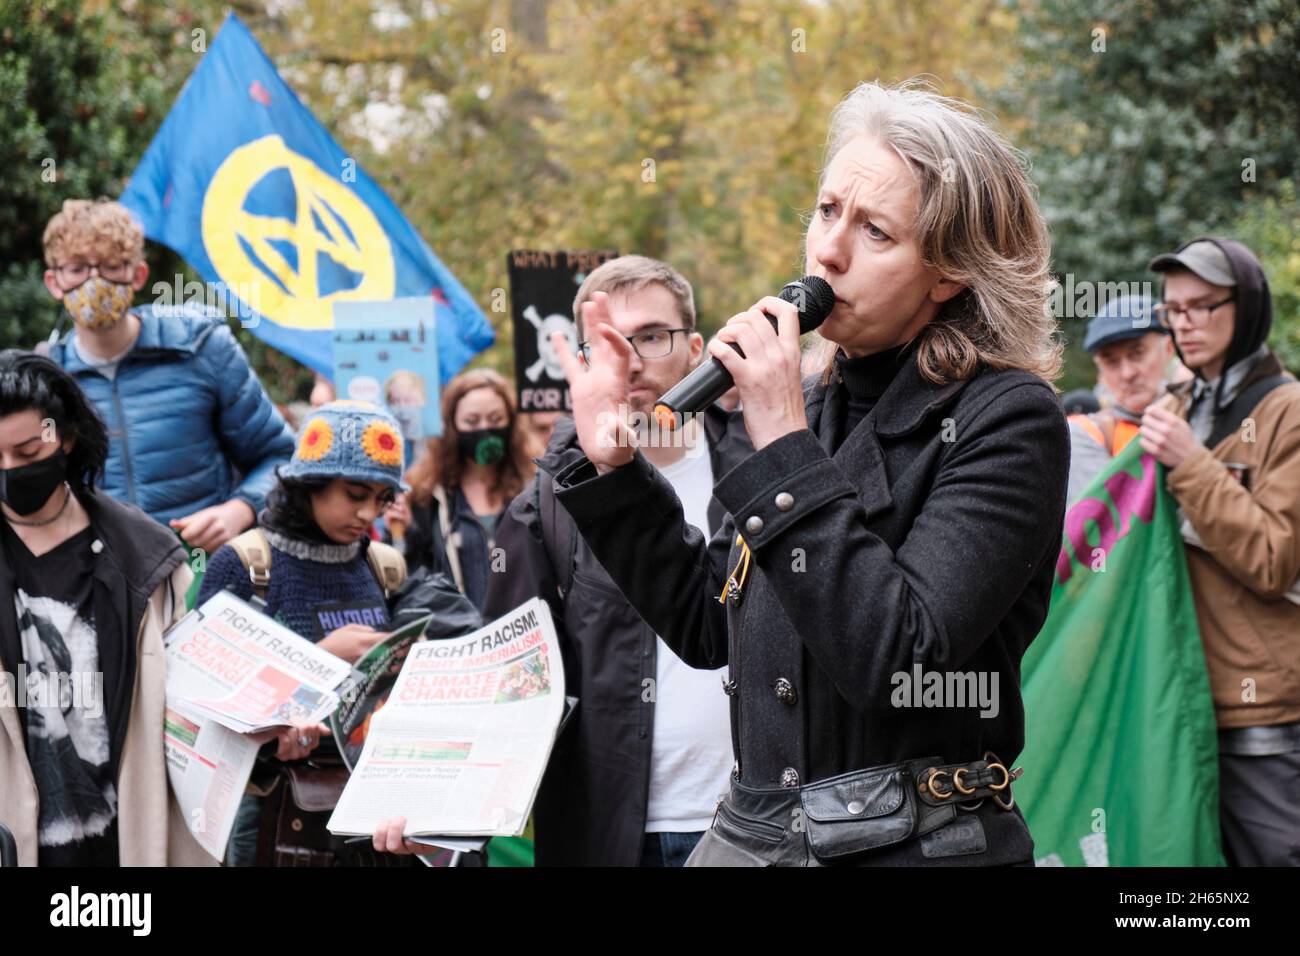 London, UK. 13th Nov, 2021. Gail Bradbrook, co-founder of Extinction Rebellion gives a speech for Extinction Rebellion's activists gathered in Lincoln's Inn Fields, for the Rise and Rebel March to protest for the climate emergency, following COP26 summit. Credit: Chiara Fabbro/Alamy Live News Stock Photo